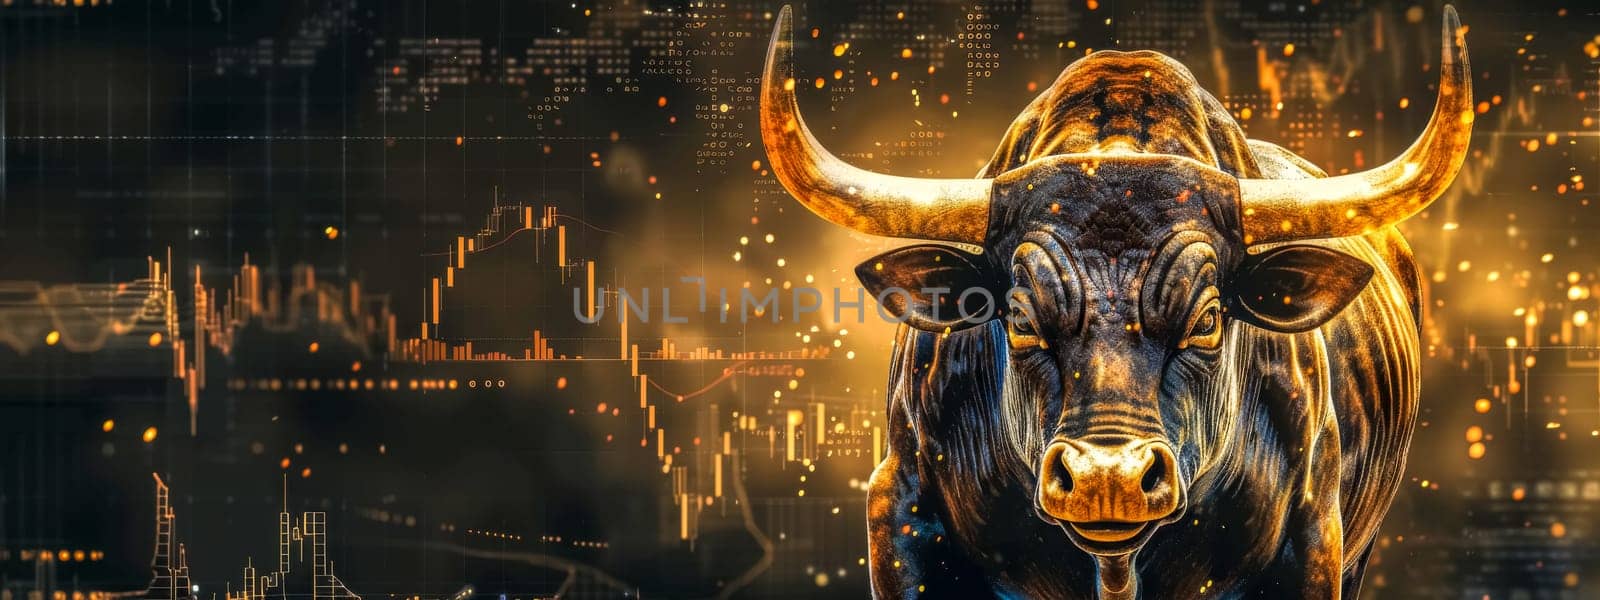 A composite of a bull sculpture symbolizing strength in a financial market setting with glowing charts